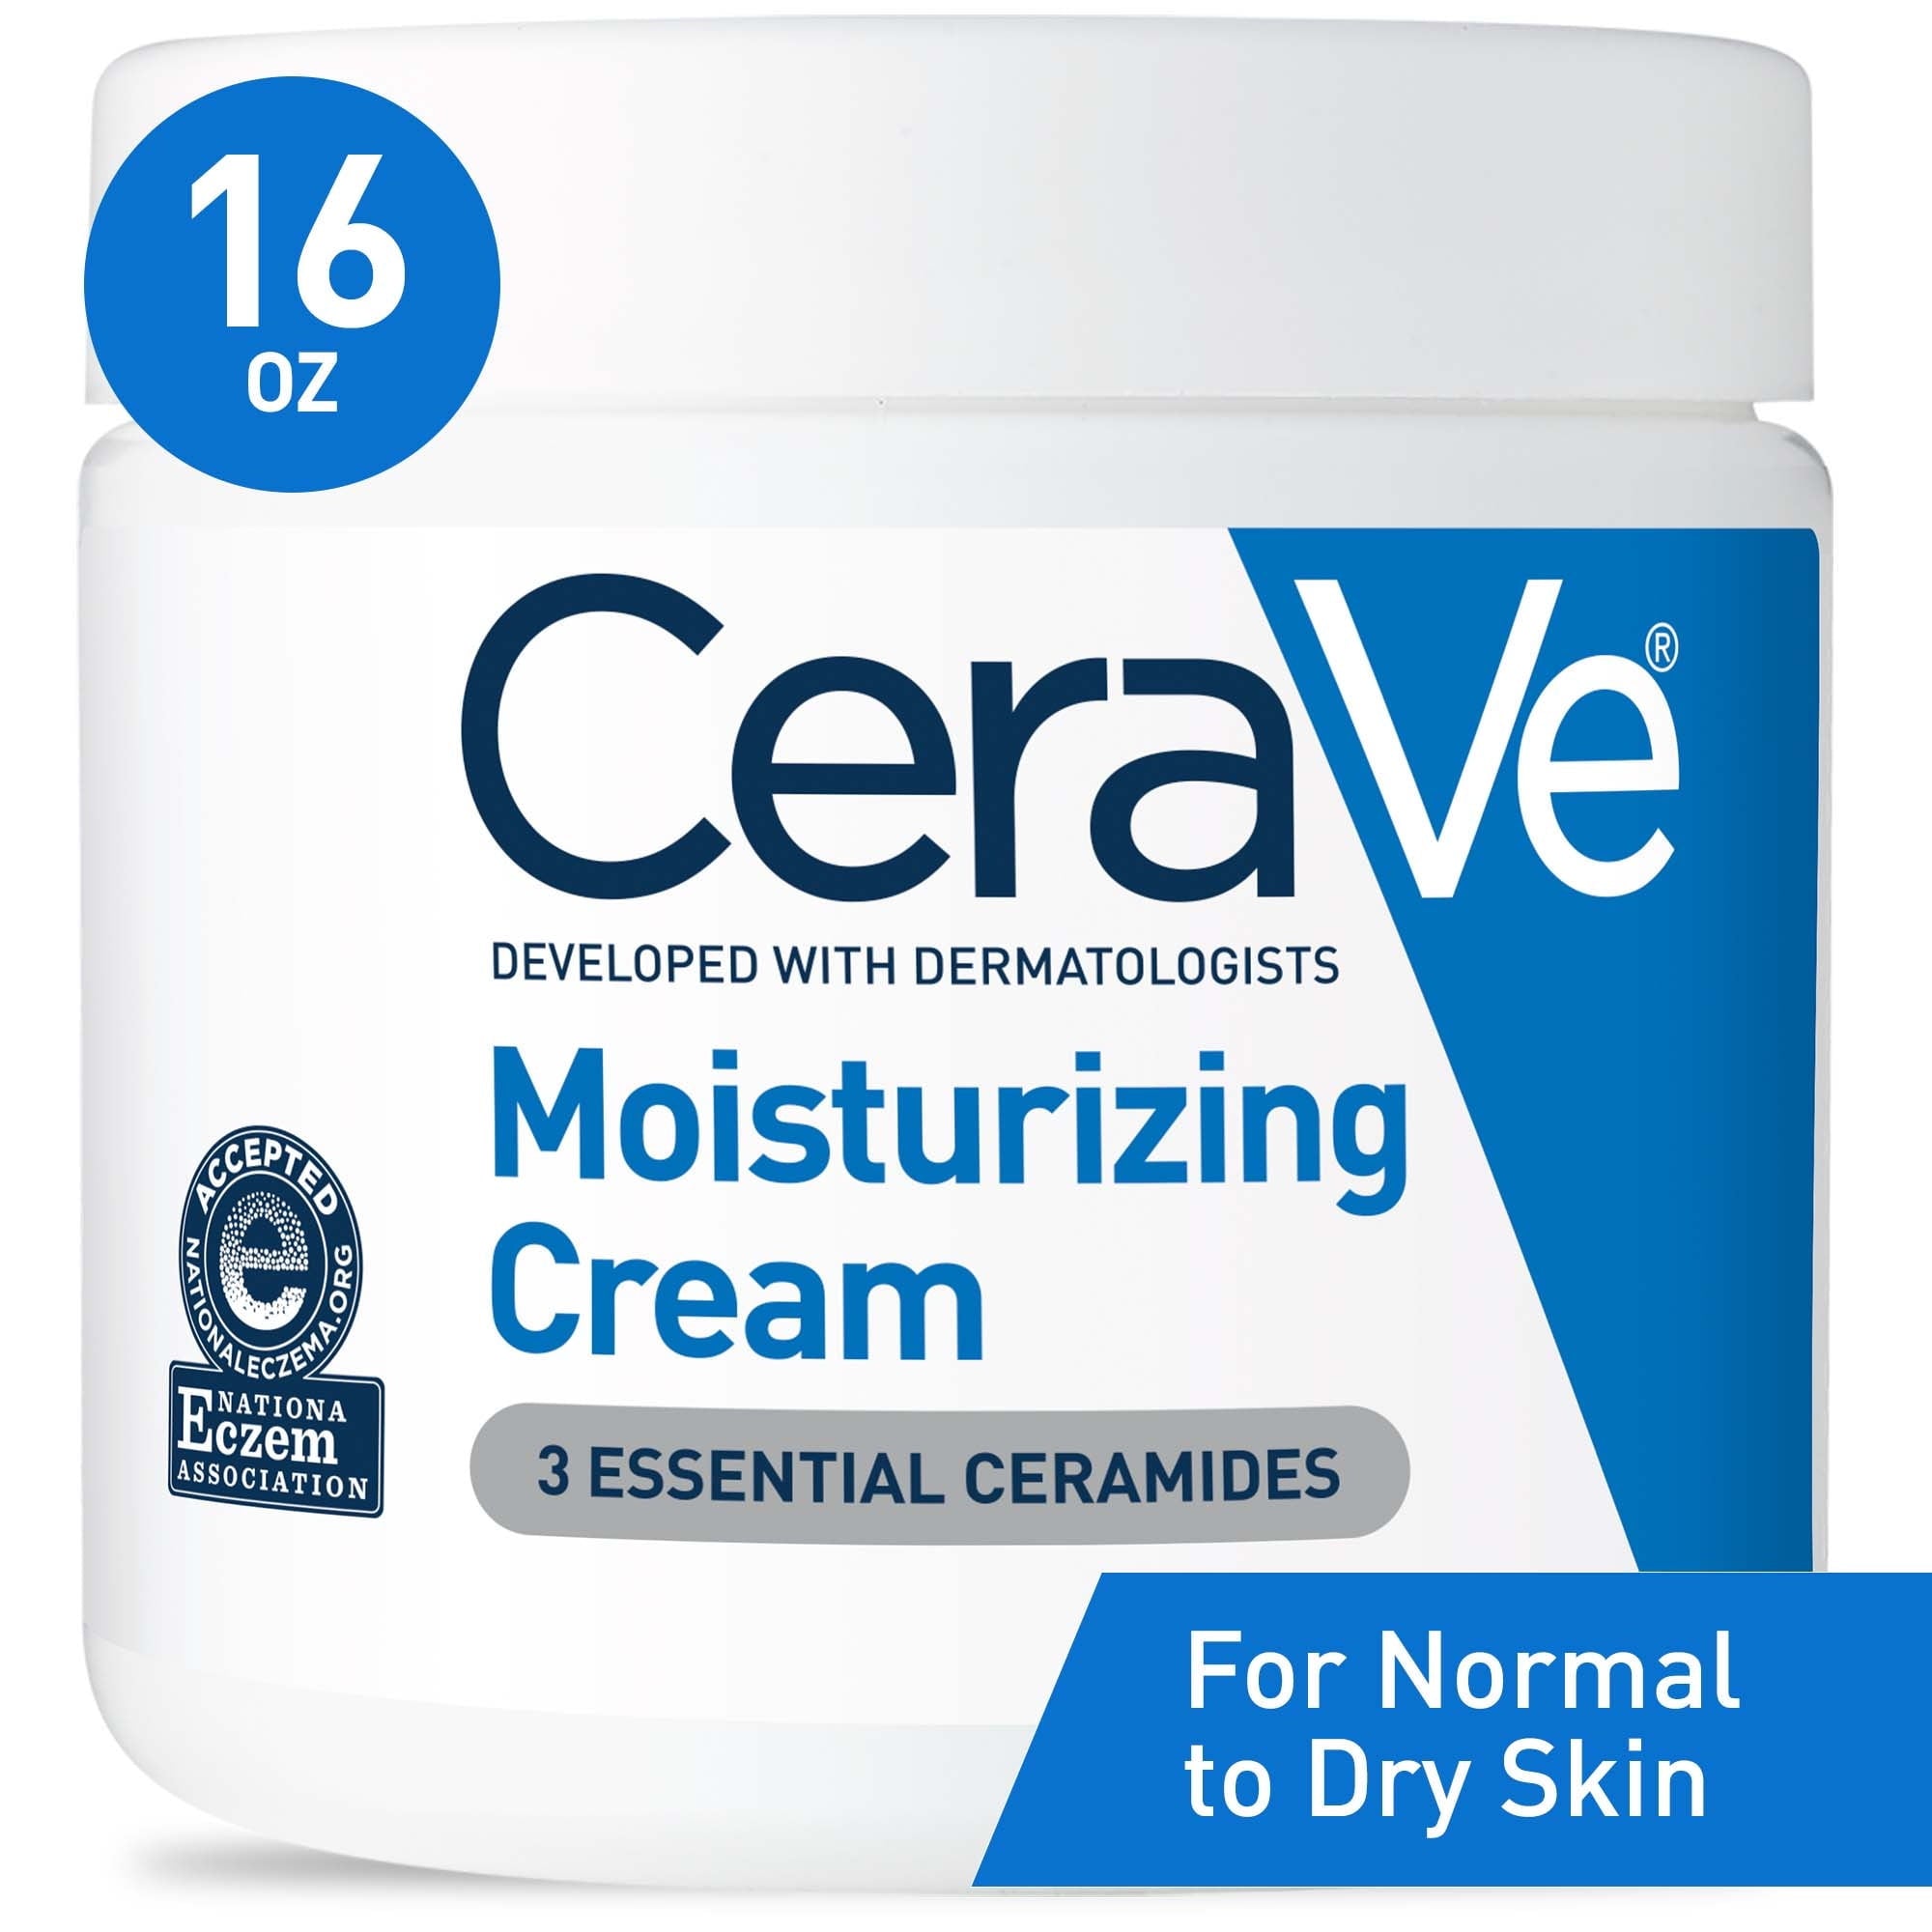 Wholesale prices with free shipping all over United States CeraVe Moisturizing Cream Jar for Face and Body for Normal to Dry Skin, 16oz - Steven Deals